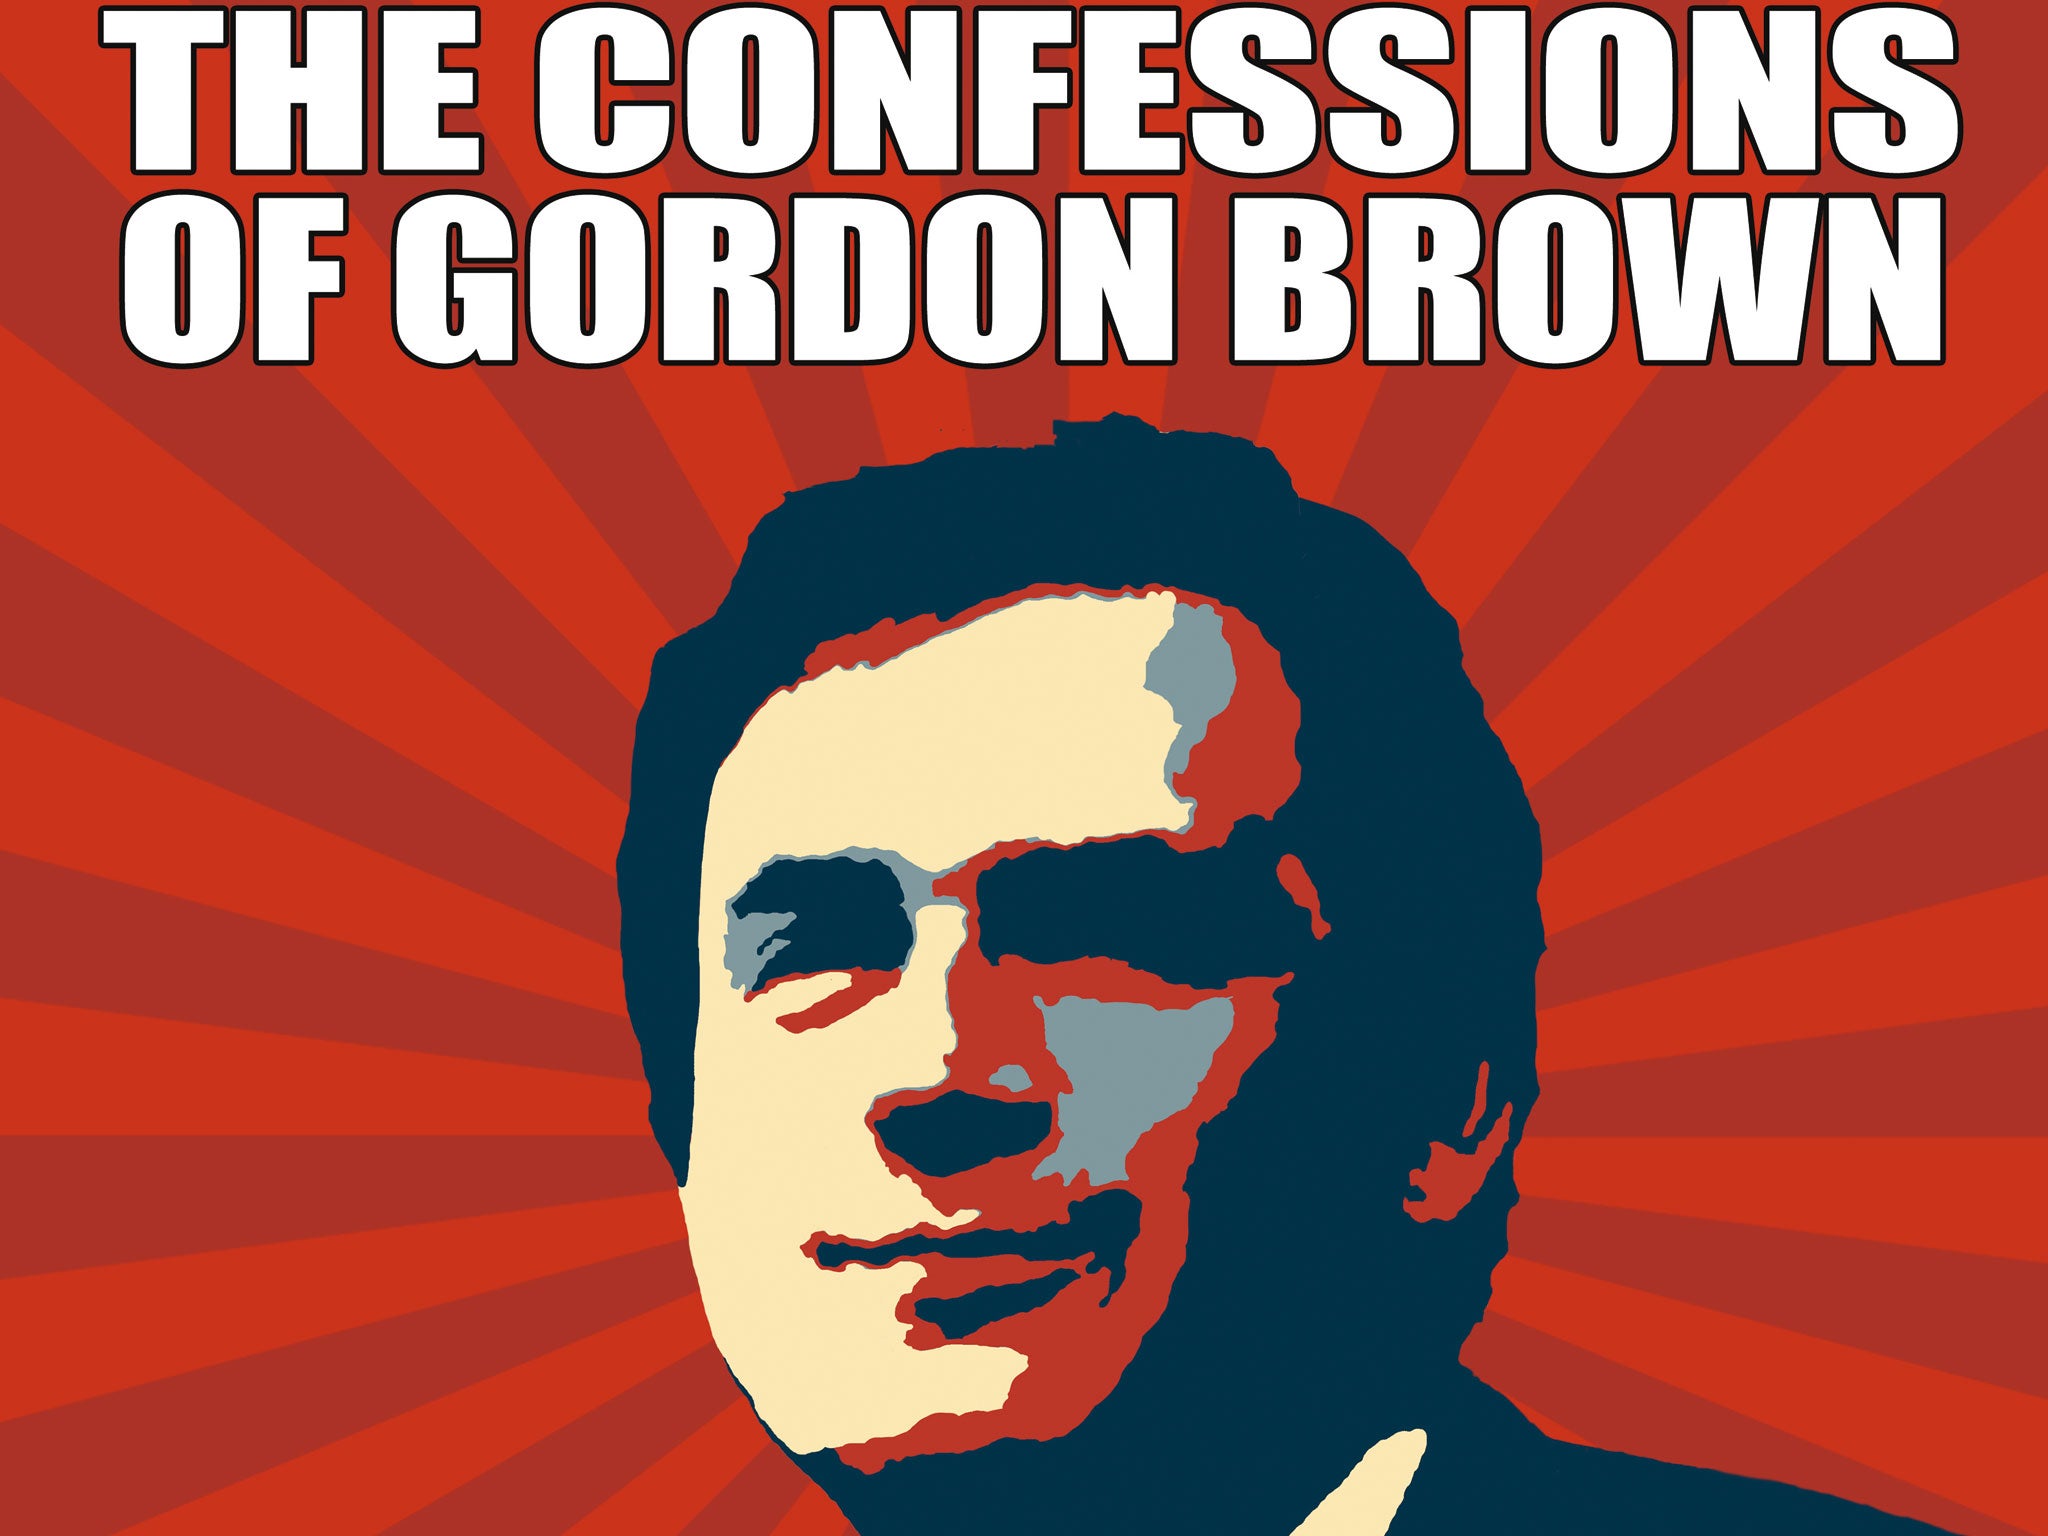 'The Confessions of Gordon Brown' - a one-man play starring Ian Grieve as the former prime minister - will open at the Edinburgh Fringe next week